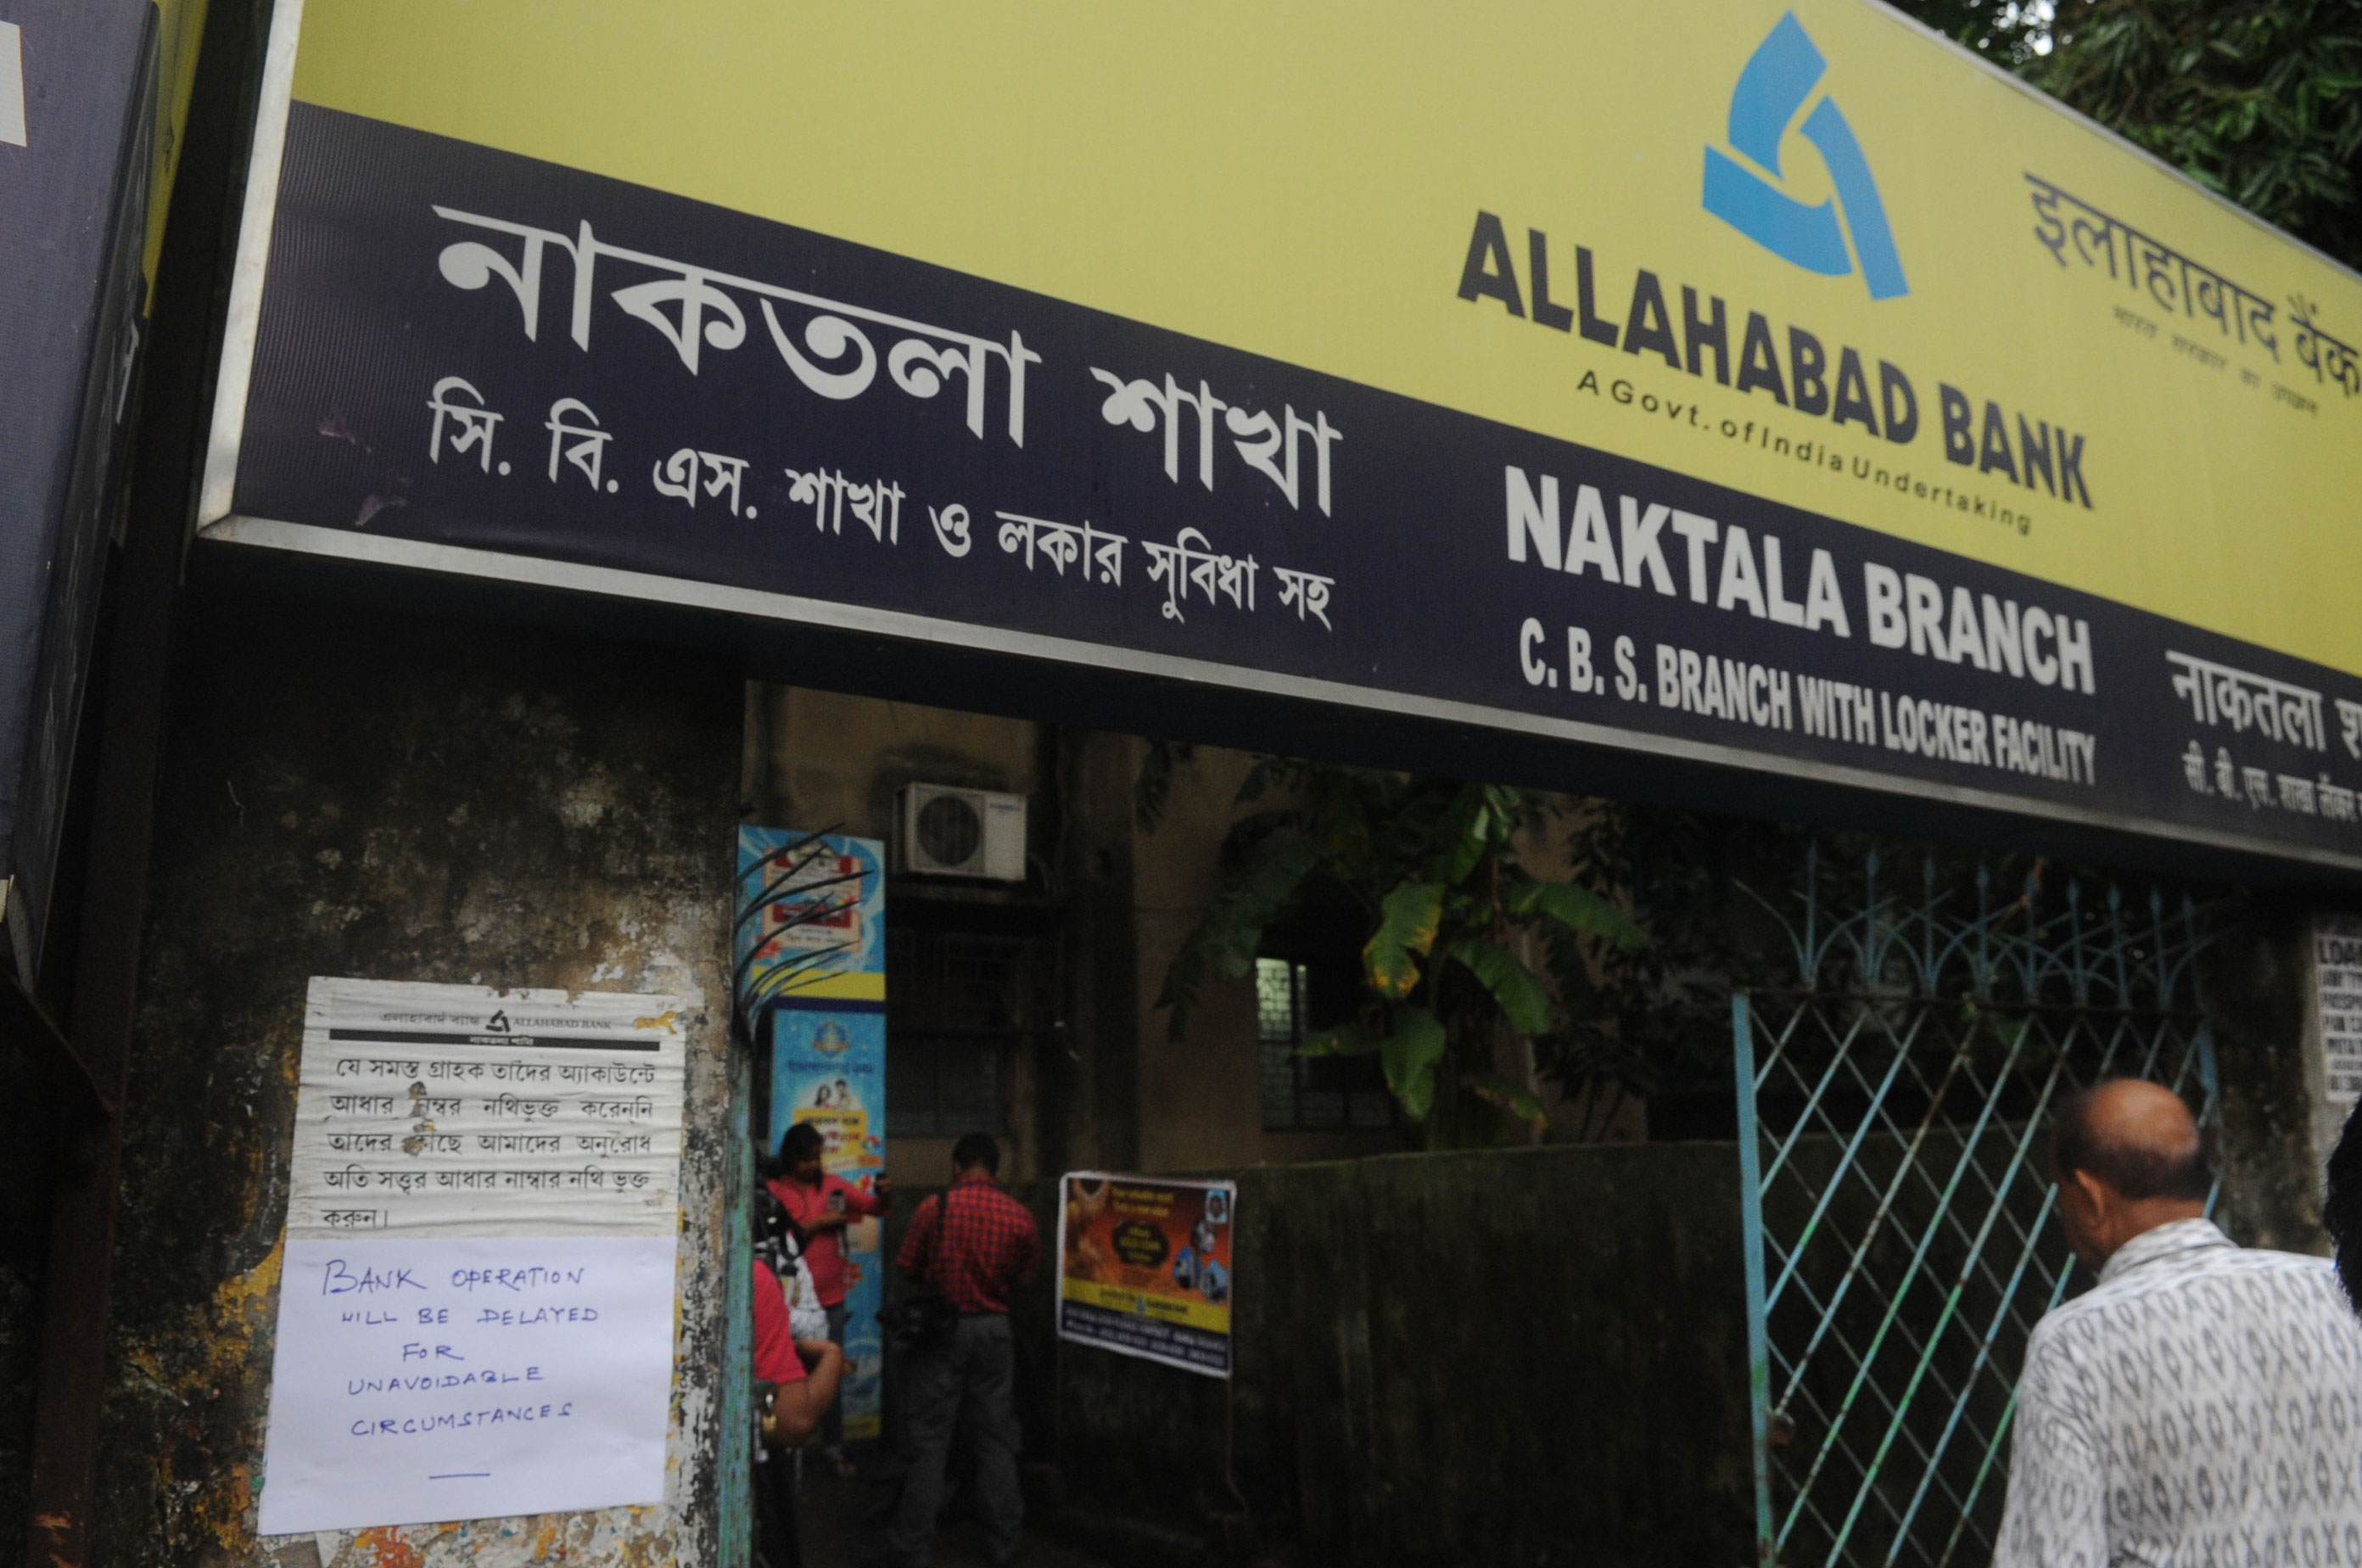 Allahabad Bank officials said capital infusion is crucial in shoring up the capital adequacy ratio and comply with Basel requirements